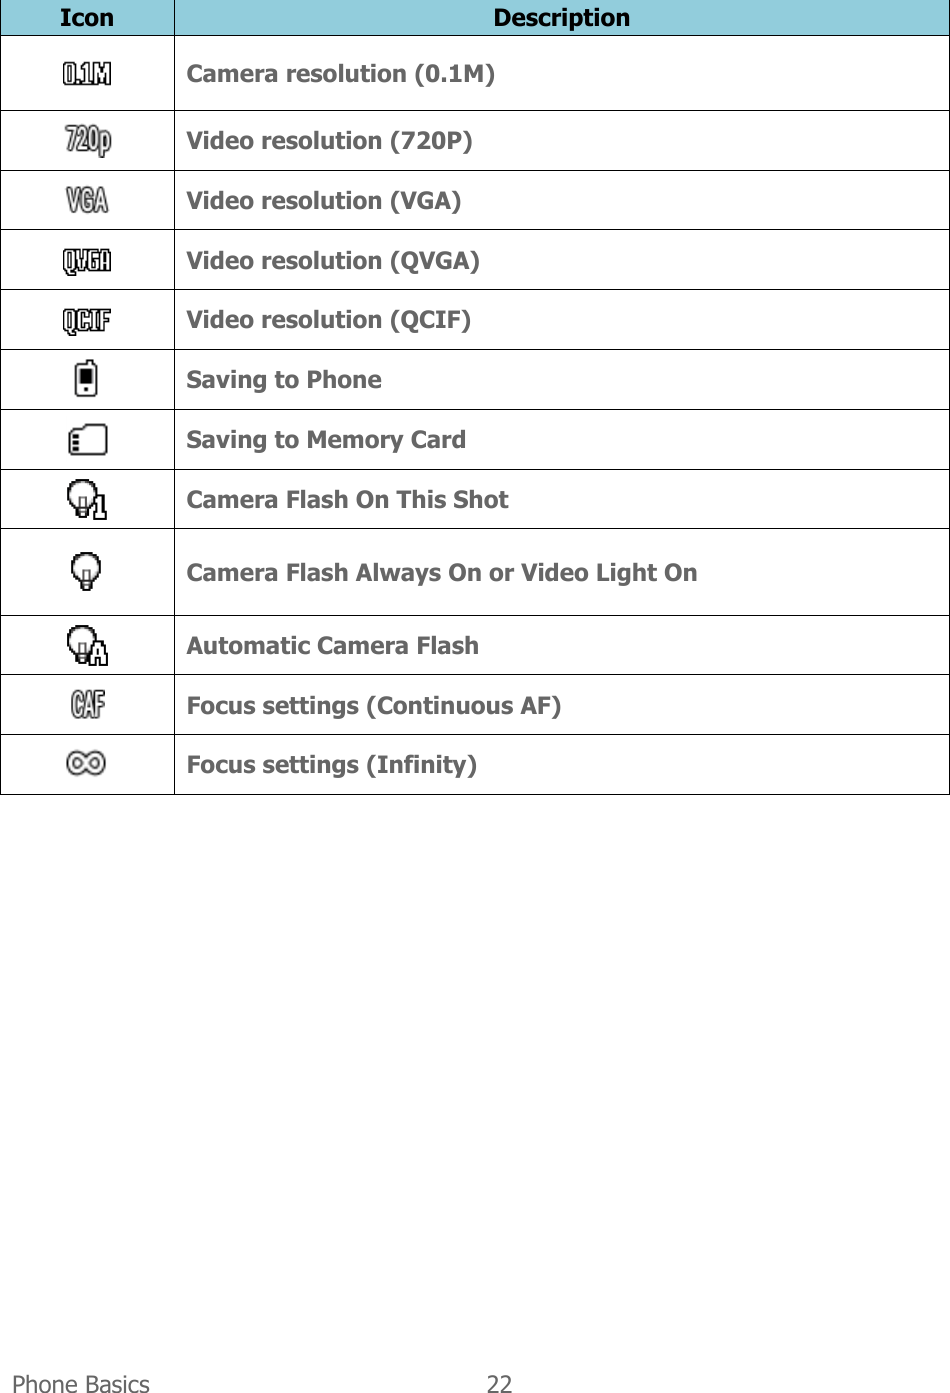  Phone Basics  22   Icon Description  Camera resolution (0.1M)  Video resolution (720P)  Video resolution (VGA)  Video resolution (QVGA)  Video resolution (QCIF)  Saving to Phone  Saving to Memory Card   Camera Flash On This Shot  Camera Flash Always On or Video Light On  Automatic Camera Flash  Focus settings (Continuous AF)  Focus settings (Infinity) 